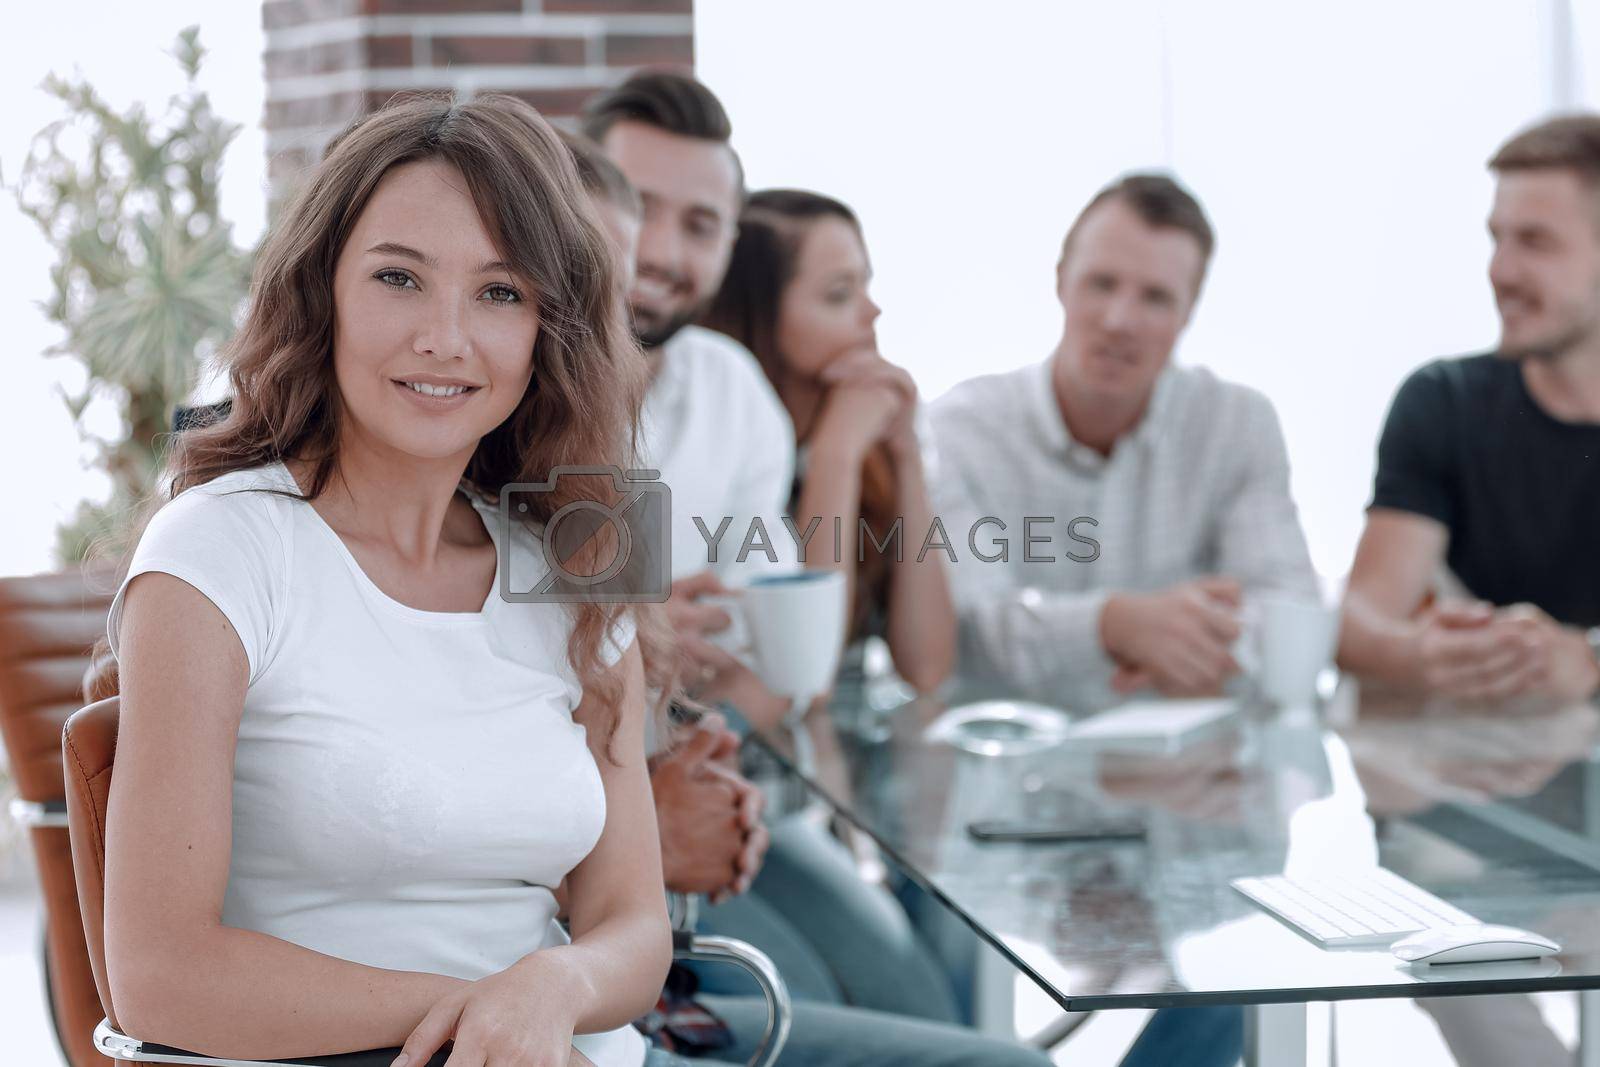 Royalty free image of creative business team discussing by asdf